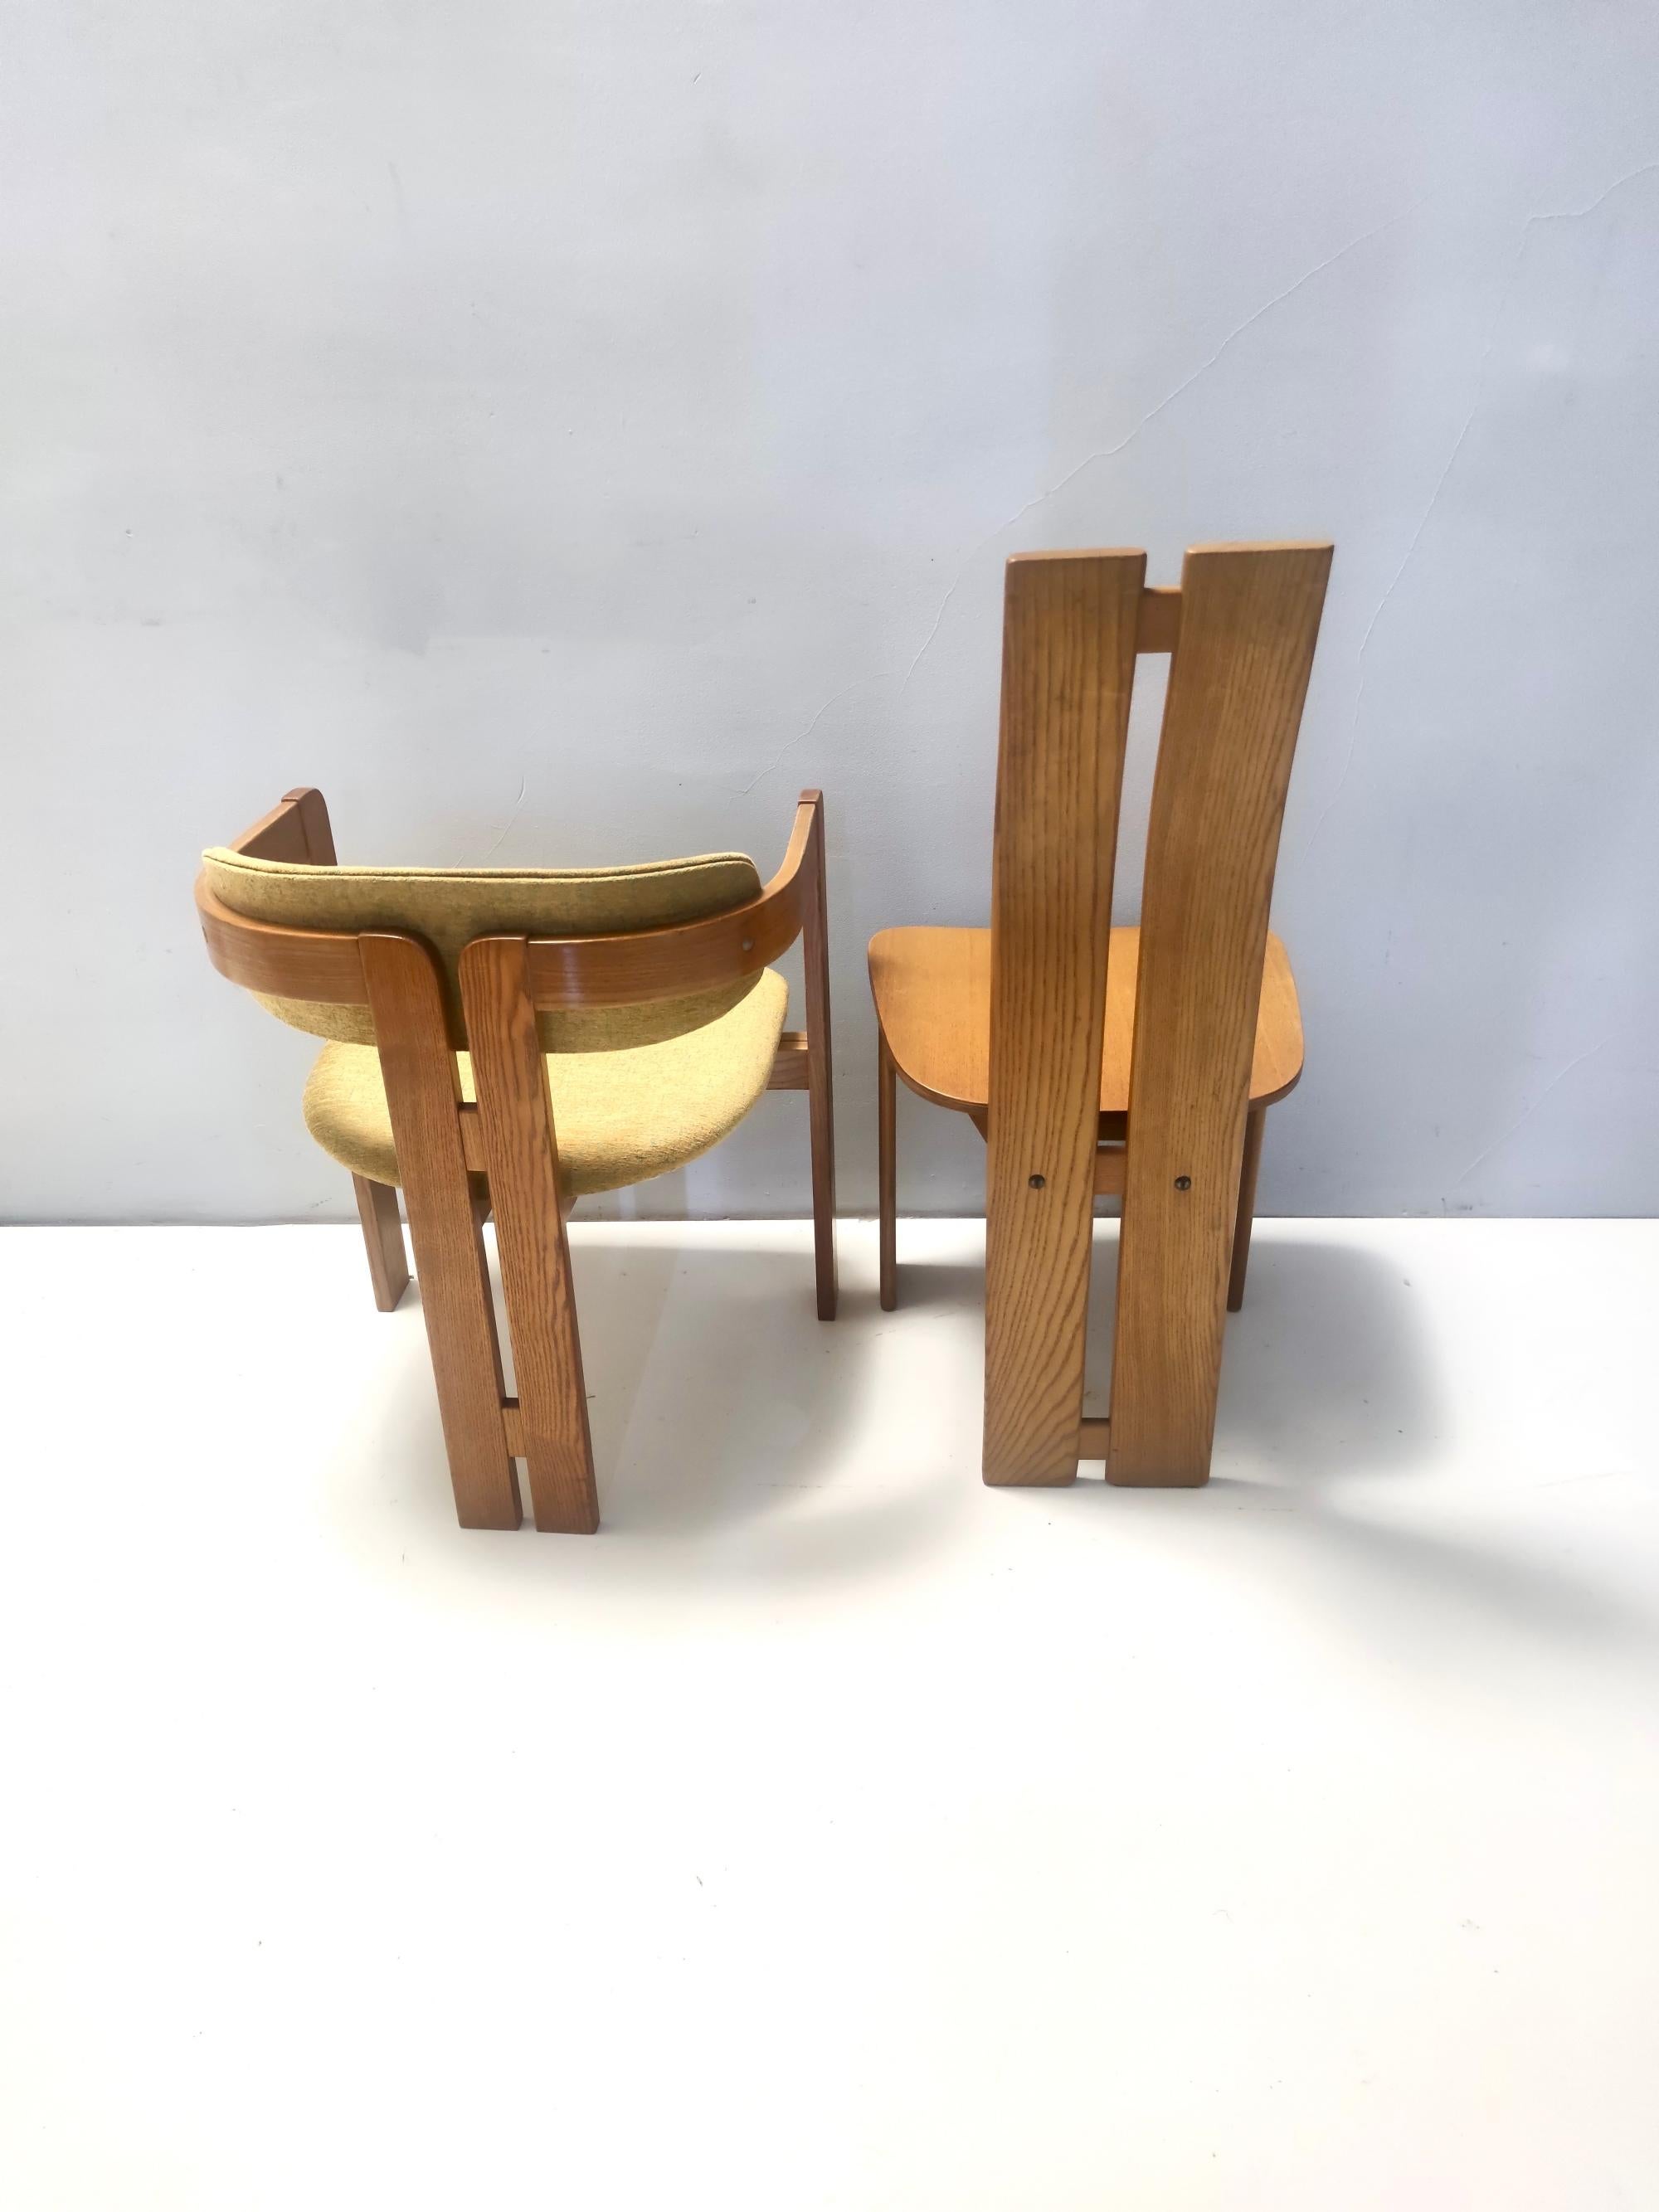 Italian Set of Four Chairs in the style of Afra & Tobia Scarpa with Durmast Frame